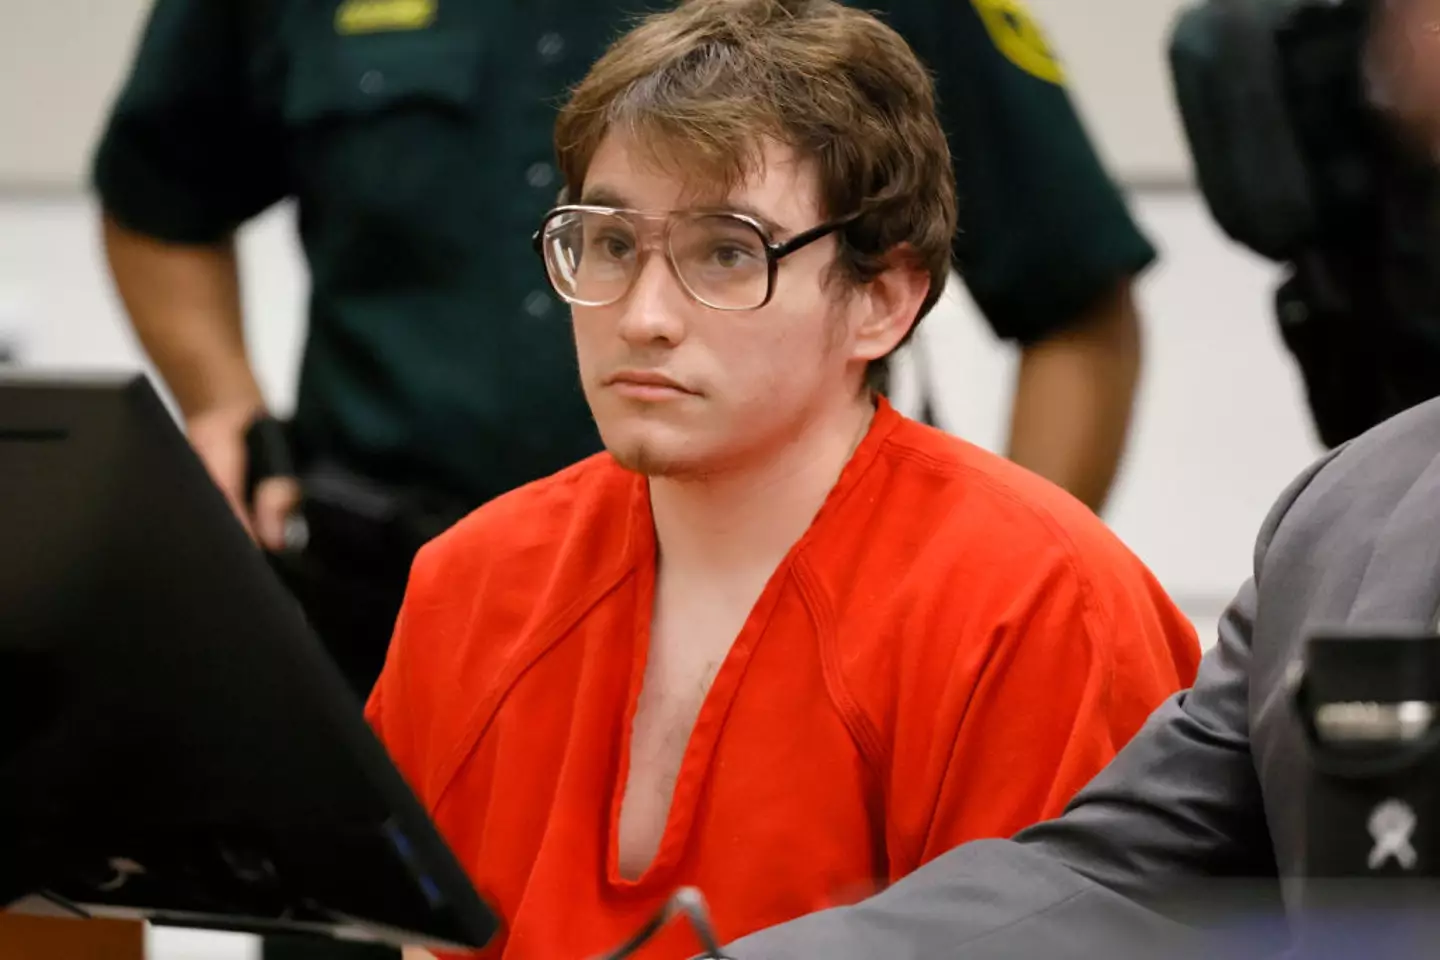 School shooter Nikolas Cruz pictured during his sentencing in 2022. (Amy Beth Bennett-Pool/Getty Images)